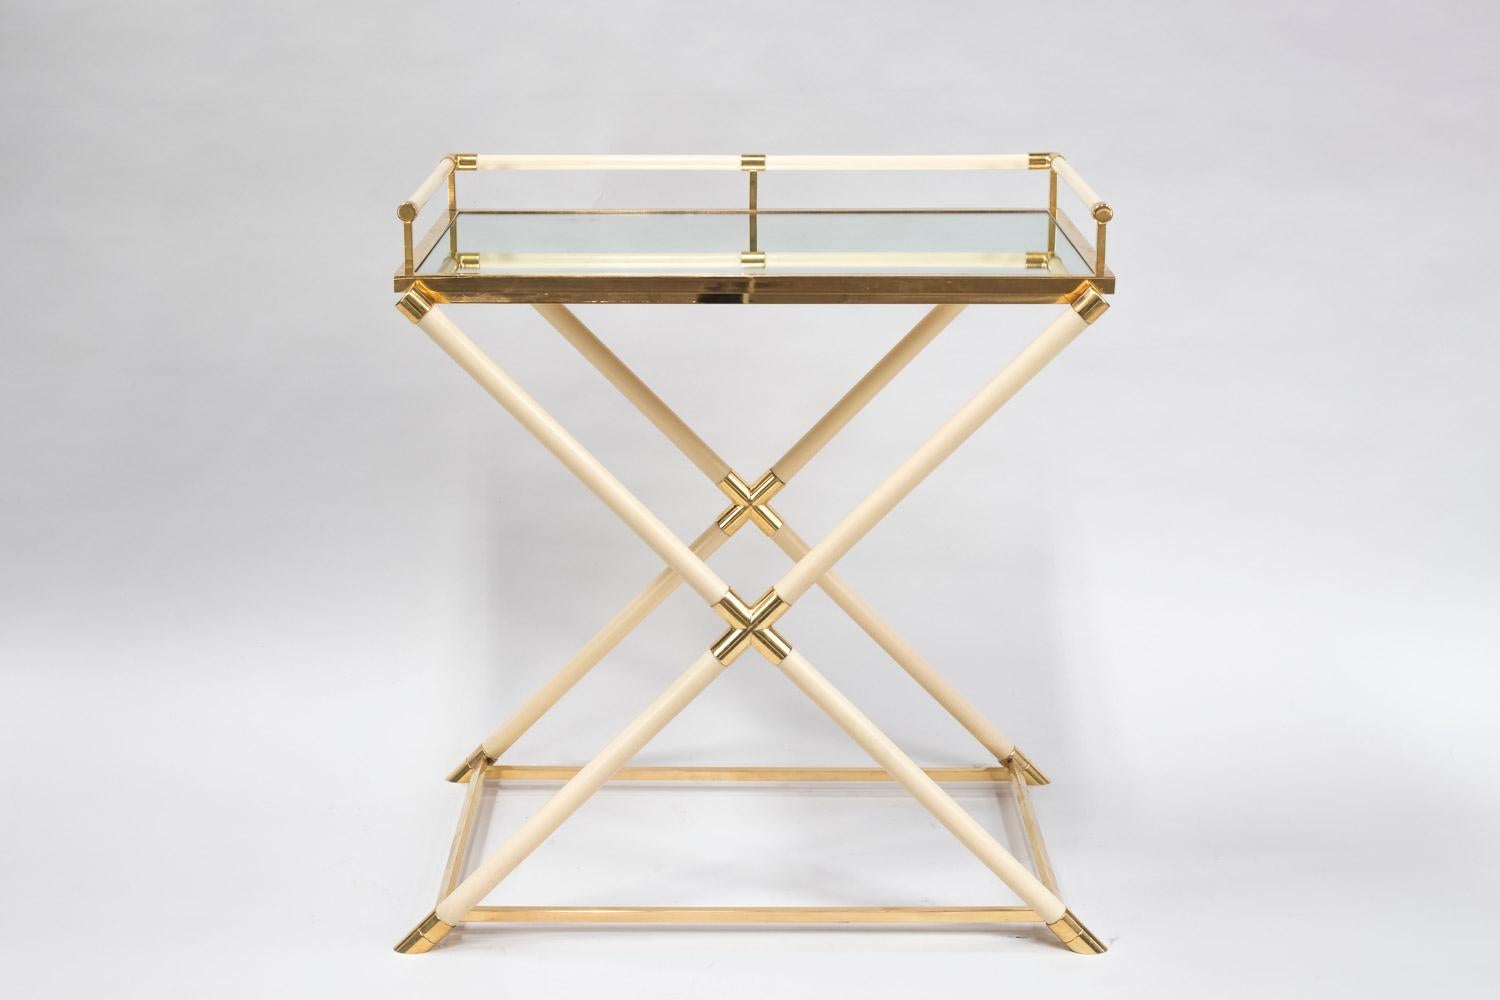 Consulat style dessert table in cream bakelite with a X shaped stand topped by a removable tray with a mirror background and bakelite uprights on three sides in four. The frame under the tray, elbows, uprights endings and legs, stretchers are in